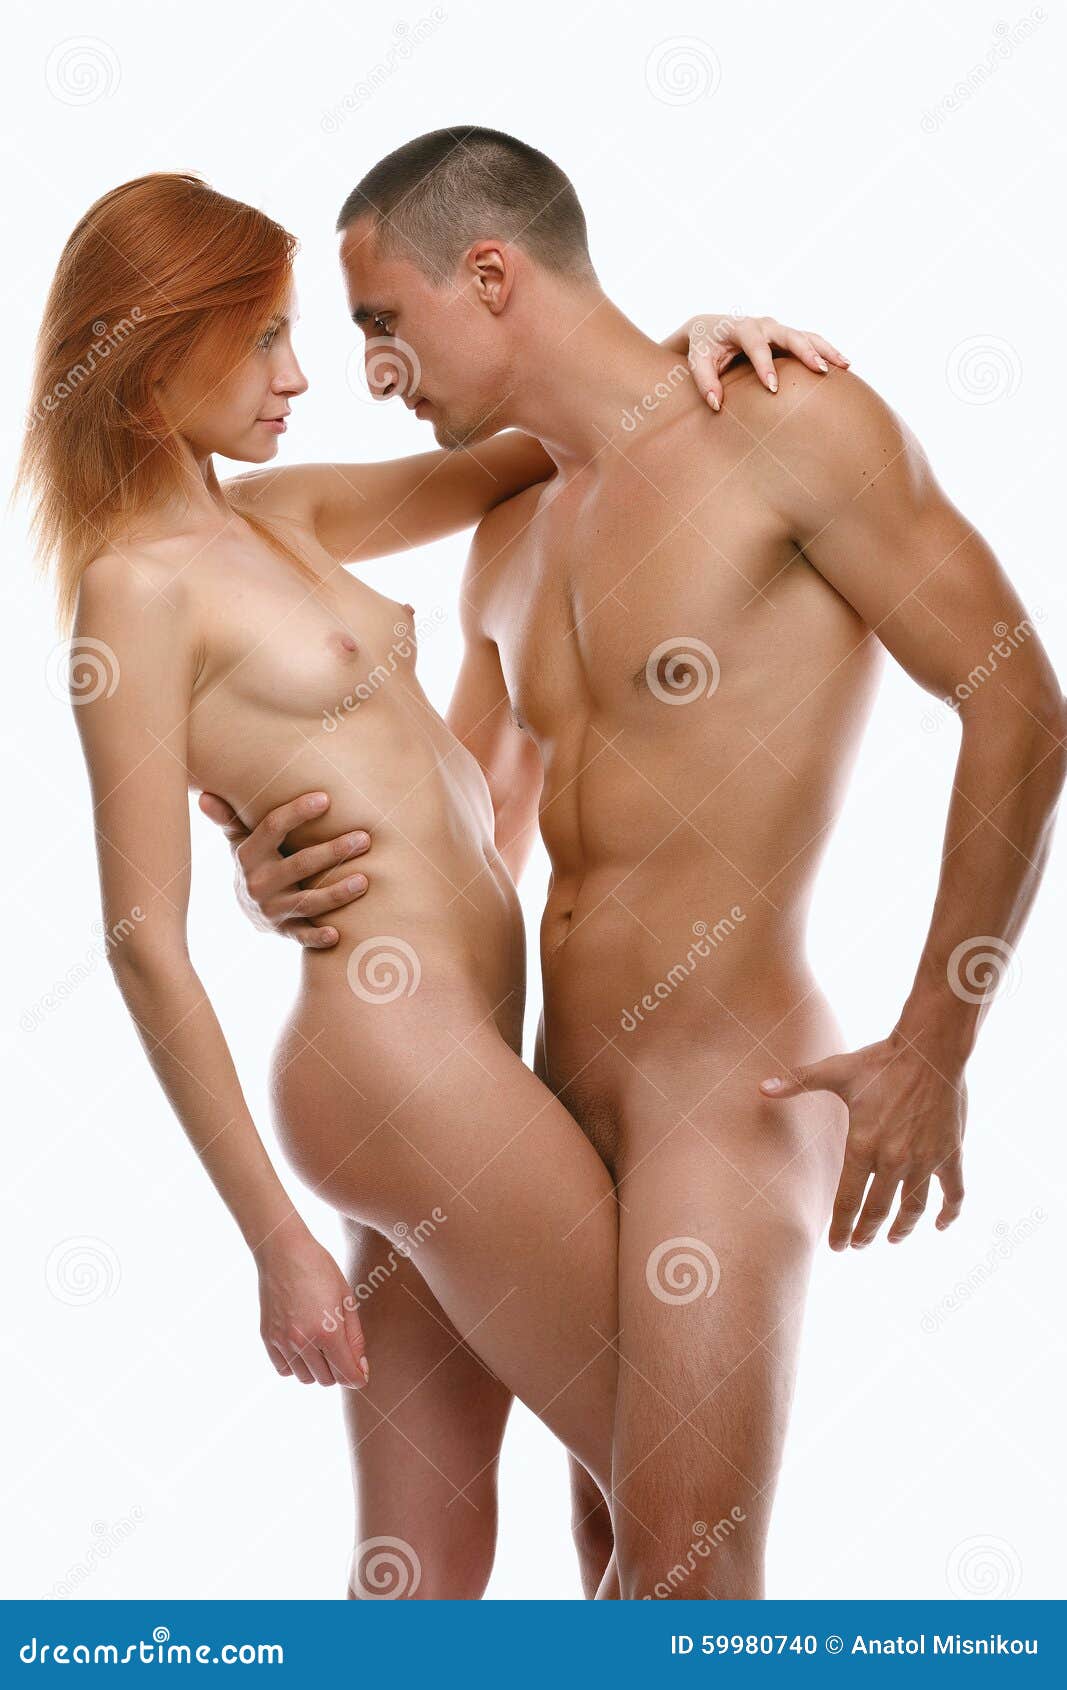 Hot nude couples